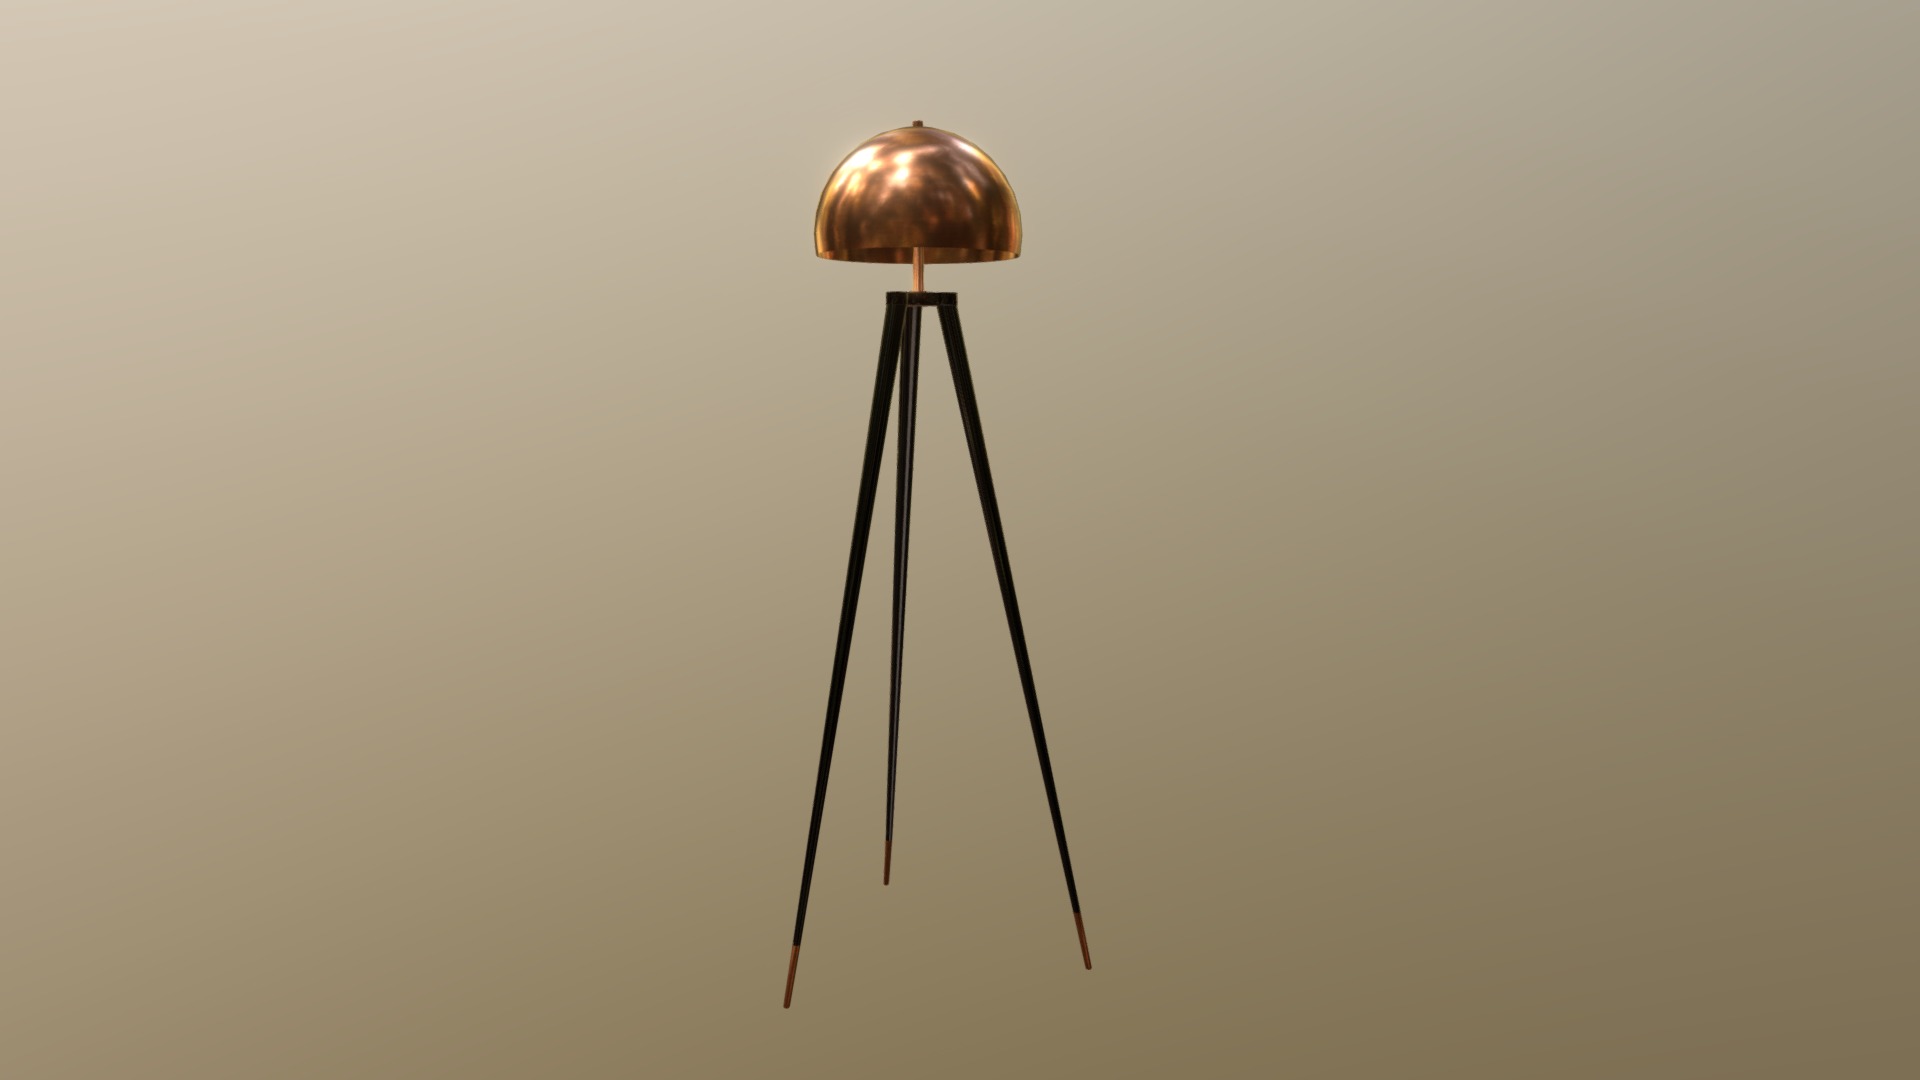 3D model Lamp 10 - This is a 3D model of the Lamp 10. The 3D model is about a light bulb on a stand.